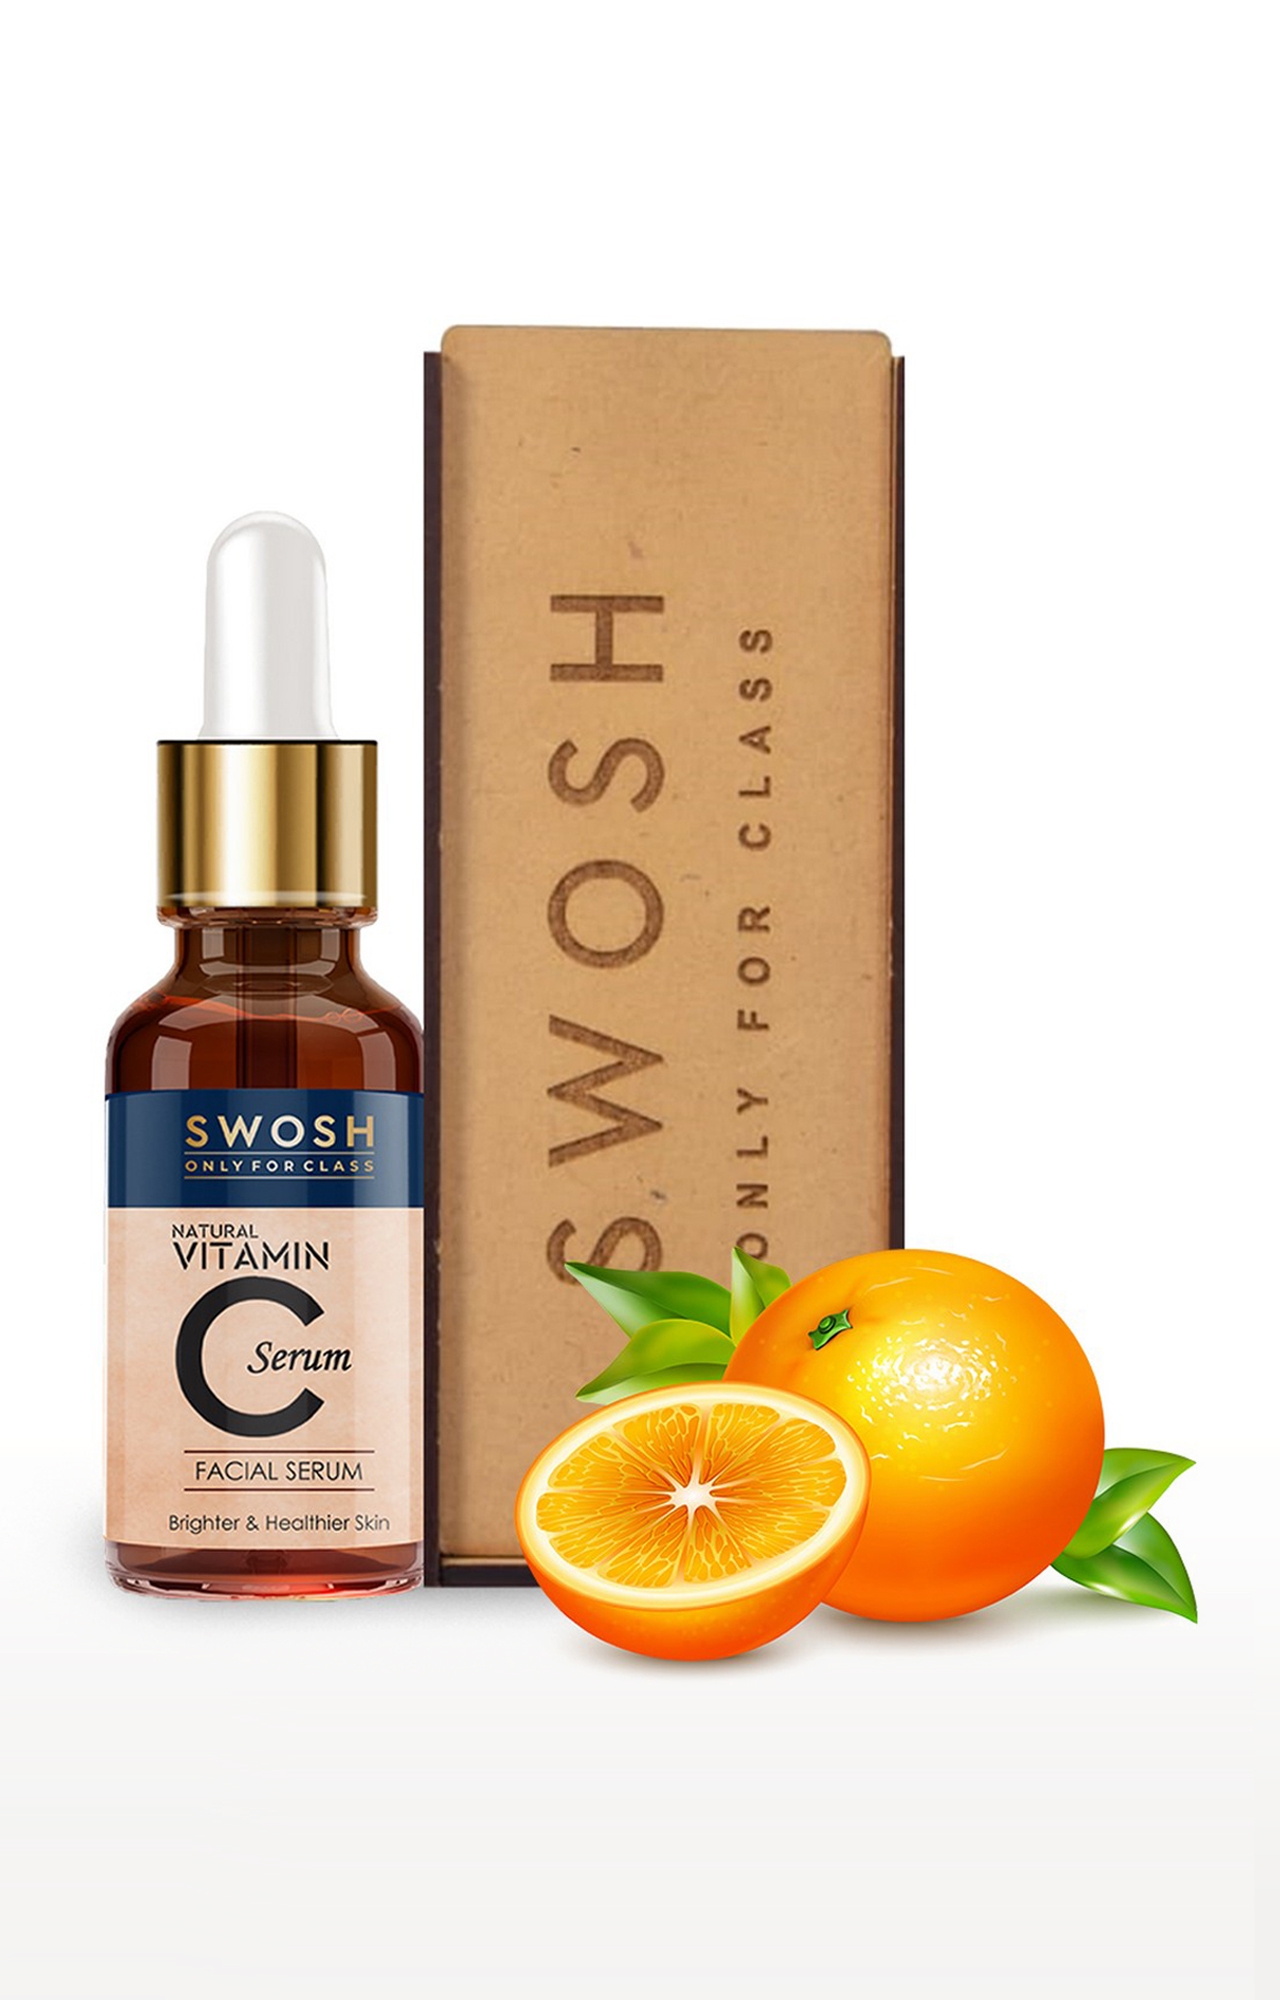 SWOSH | Swosh Vitamin C Serum For Face Enrich With Hyaluronic Acid, Vitamin E, Tamarind Extract, Aloe Vera Extract, Dead Sea Salt For Brightening, Anti Ageing, Wrinkle Control, 30Ml 0